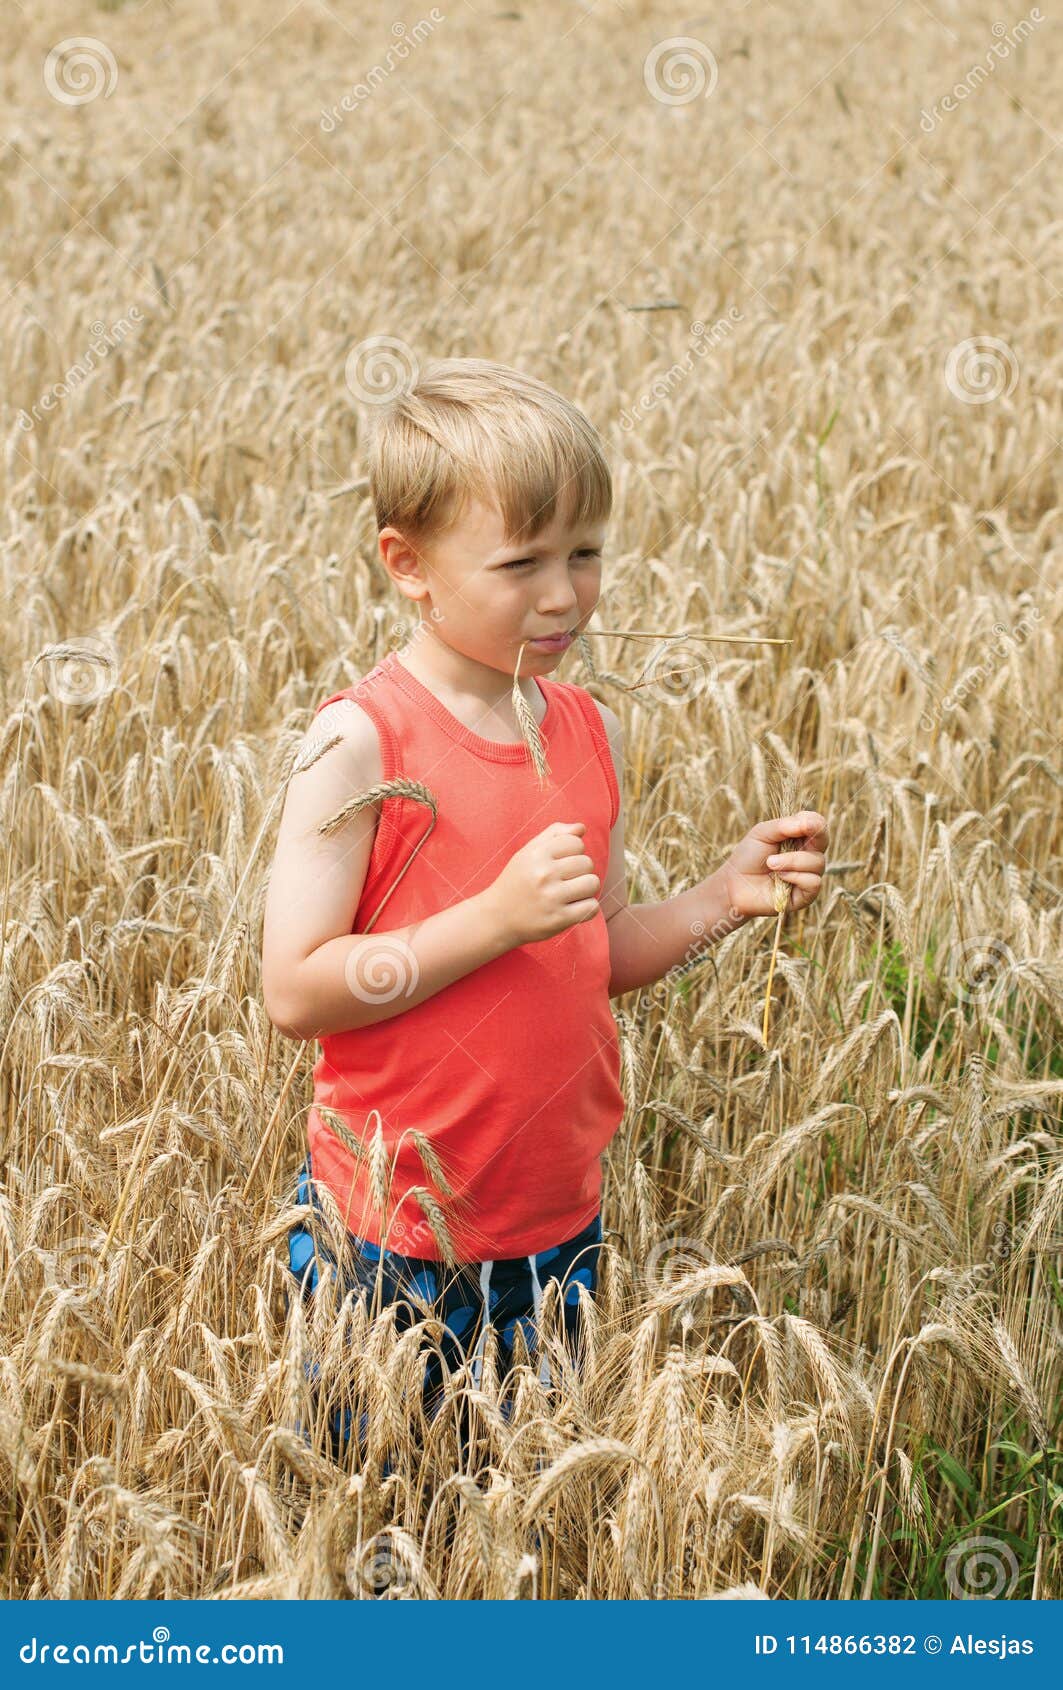 Boy in the Rural Field during a Harvest Stock Photo - Image of heat ...